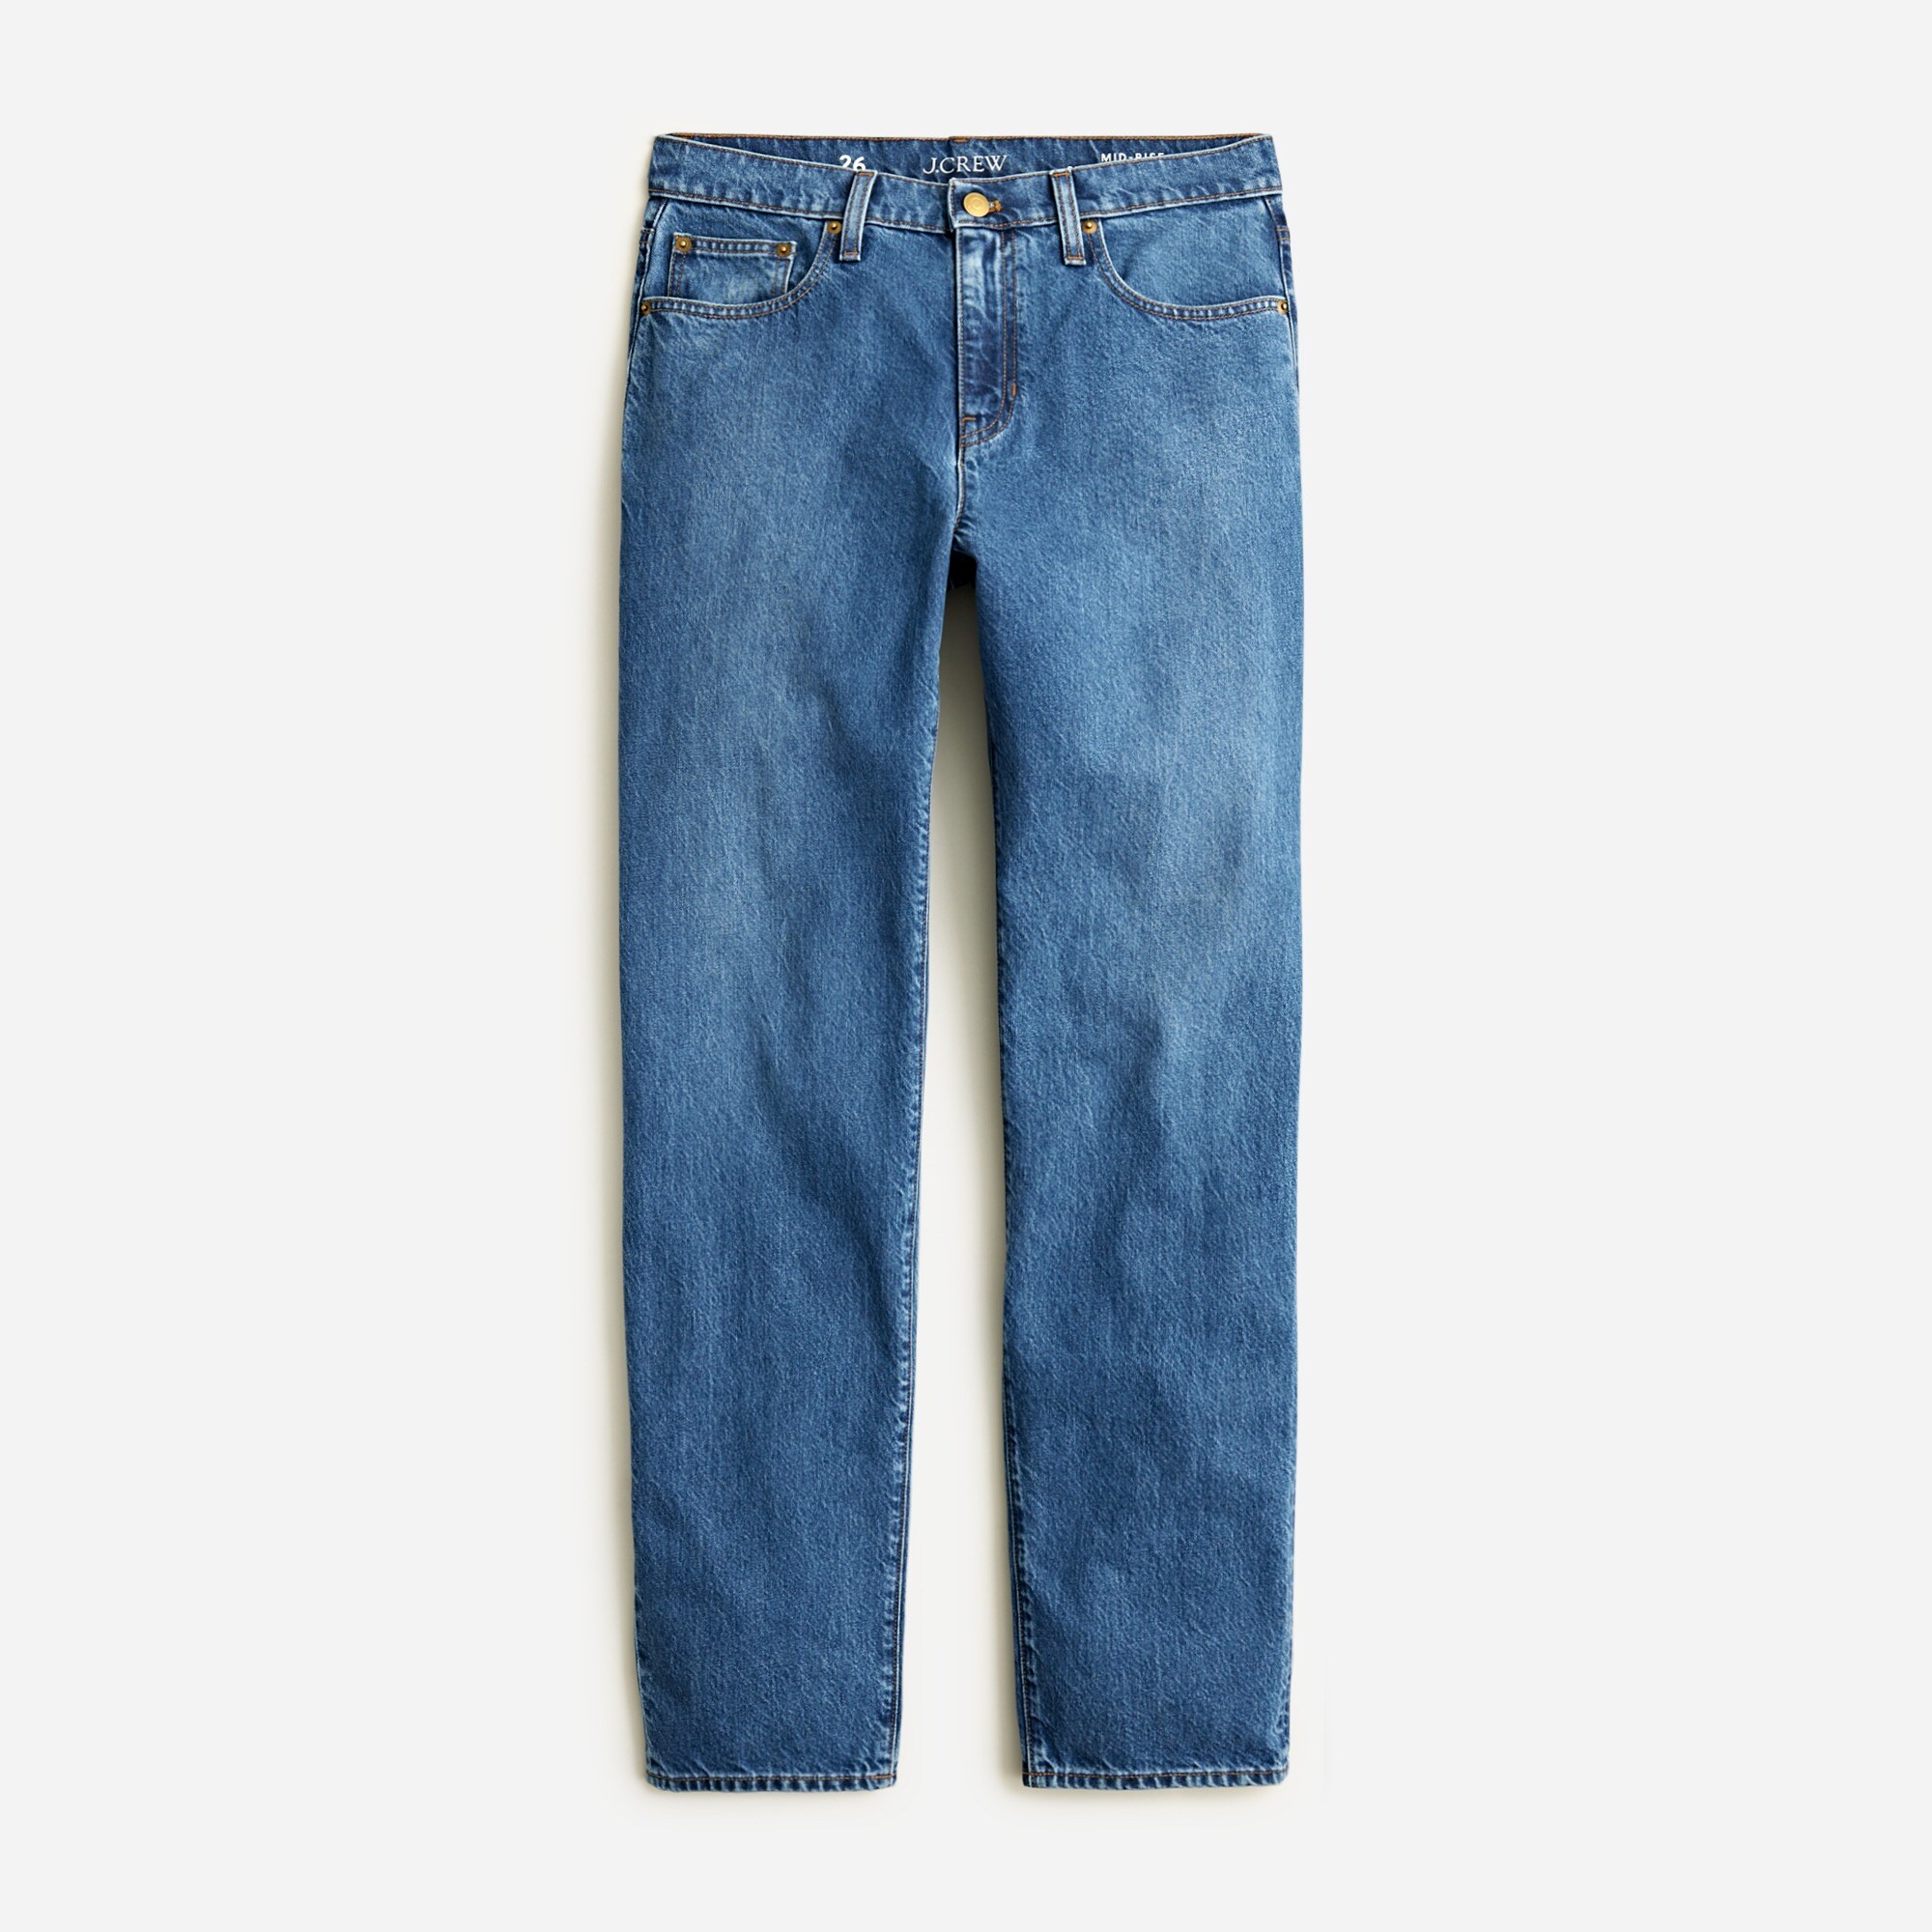  Tall slouchy-straight jean in Turney wash